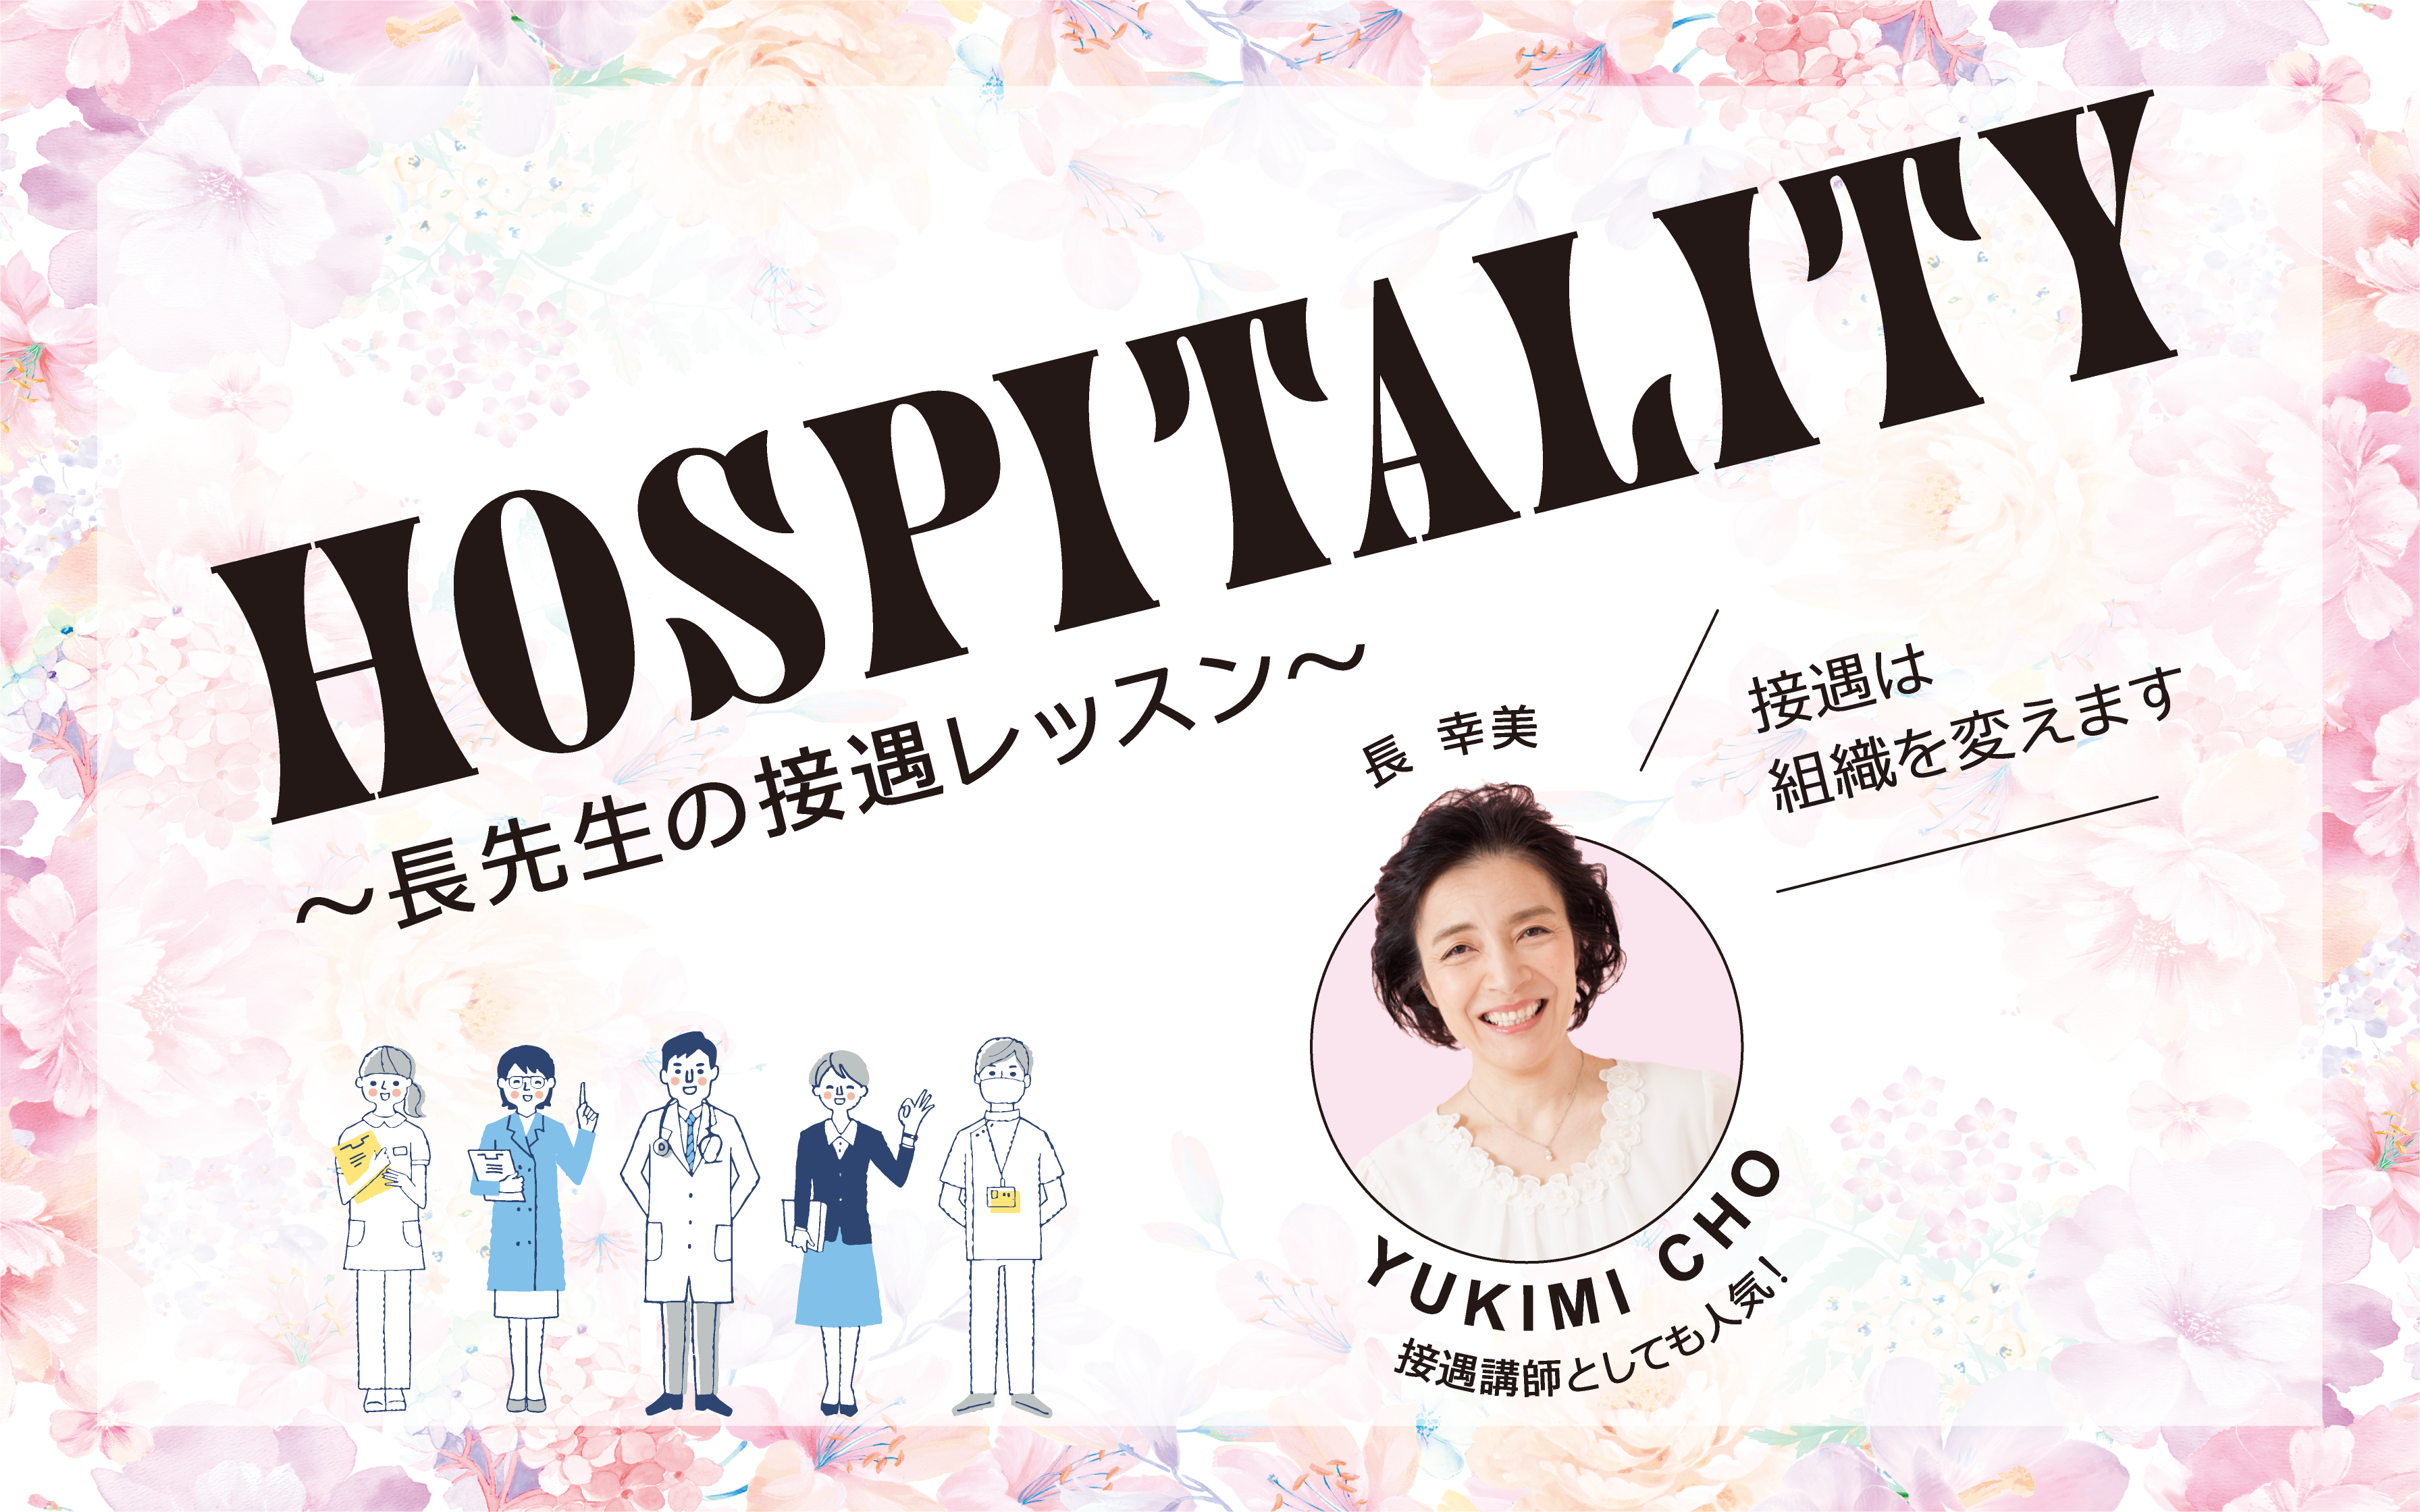 You are currently viewing HOSPITALITY 〜長先生の接遇レッスン〜 VOL.27　一年の計は元旦にあり〜人に会う機会が多いからこそ〜